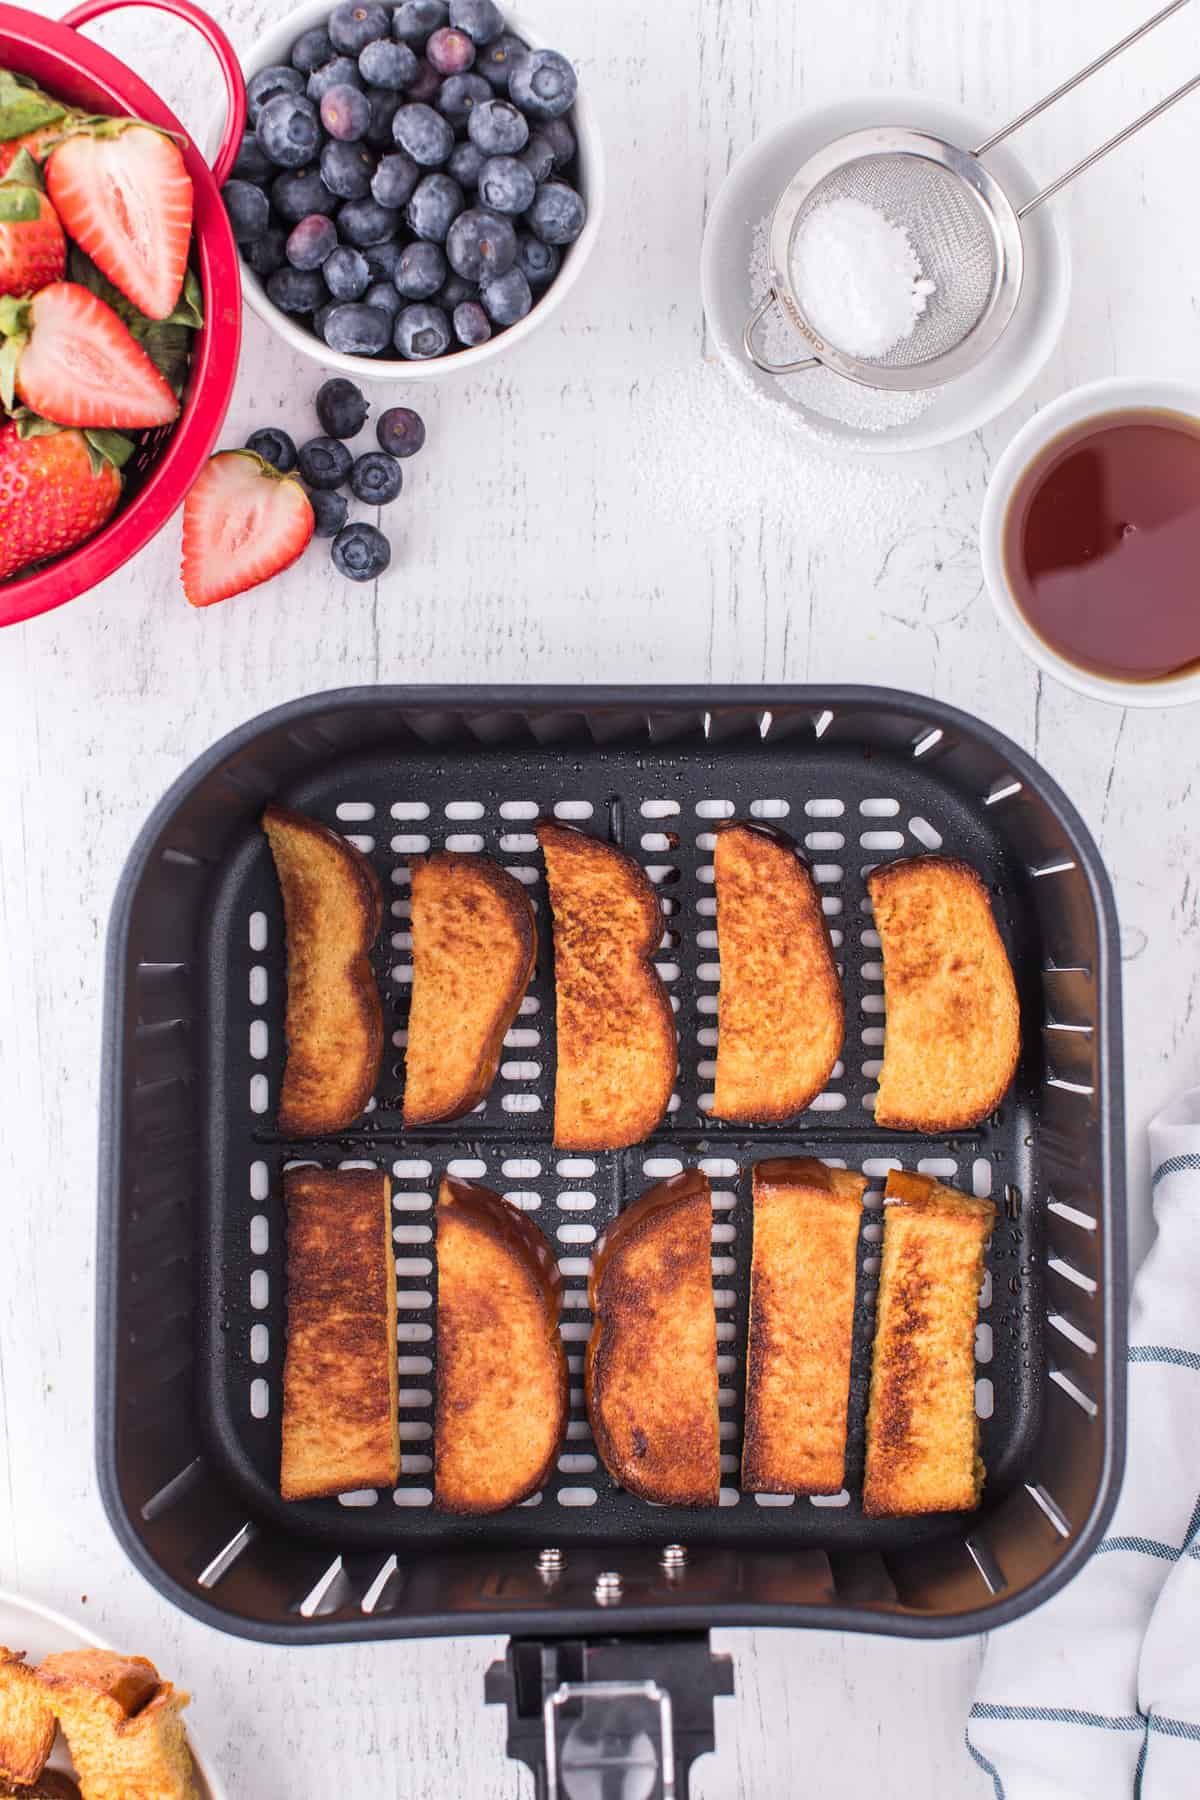 How To Make French Toast Sticks In Air Fryer